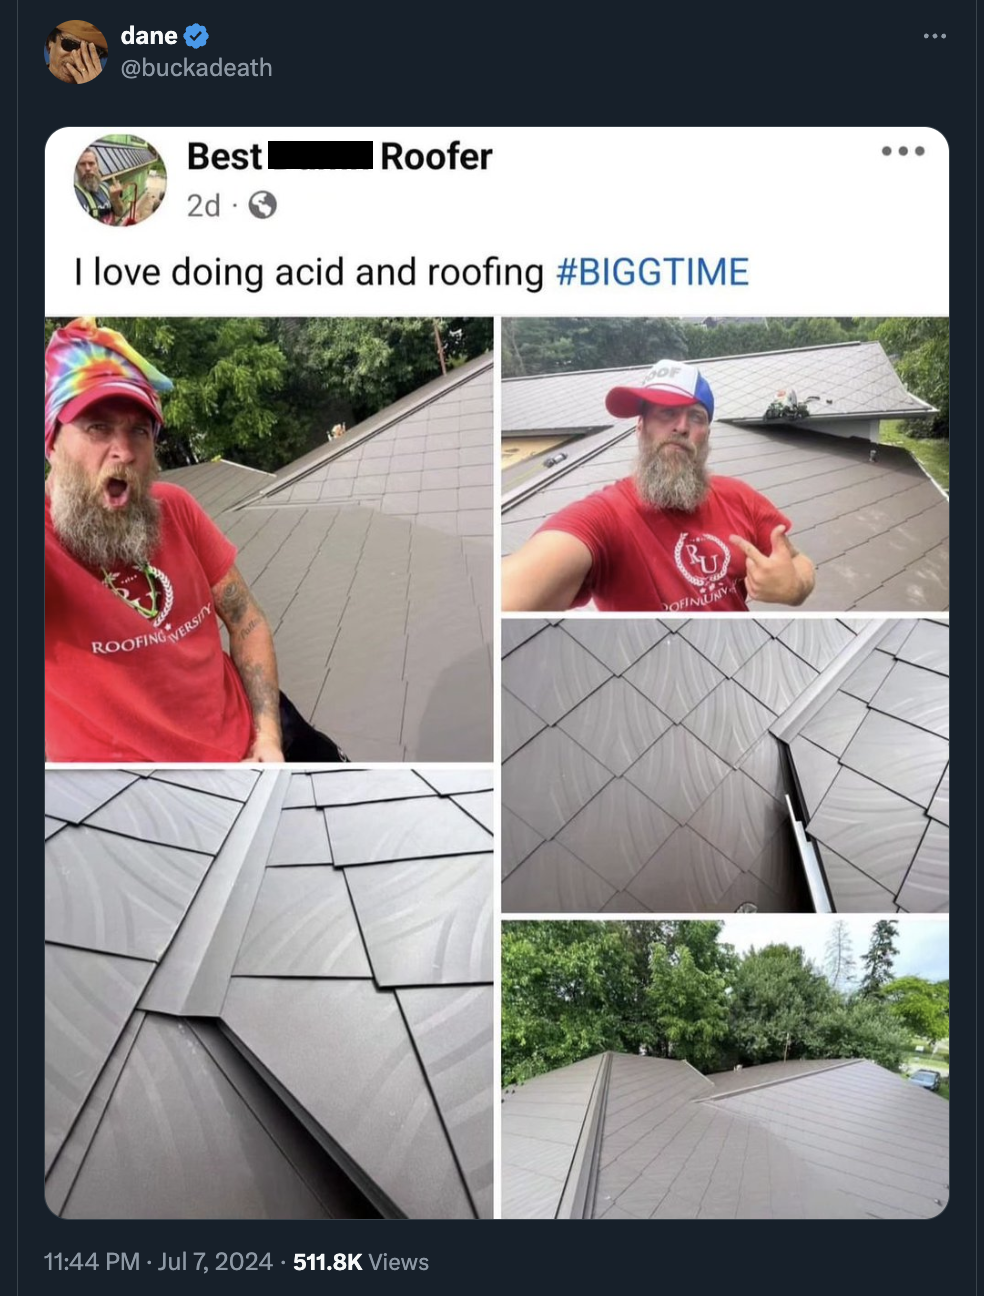 leisure - dane Best Roofer 2d I love doing acid and roofing Views